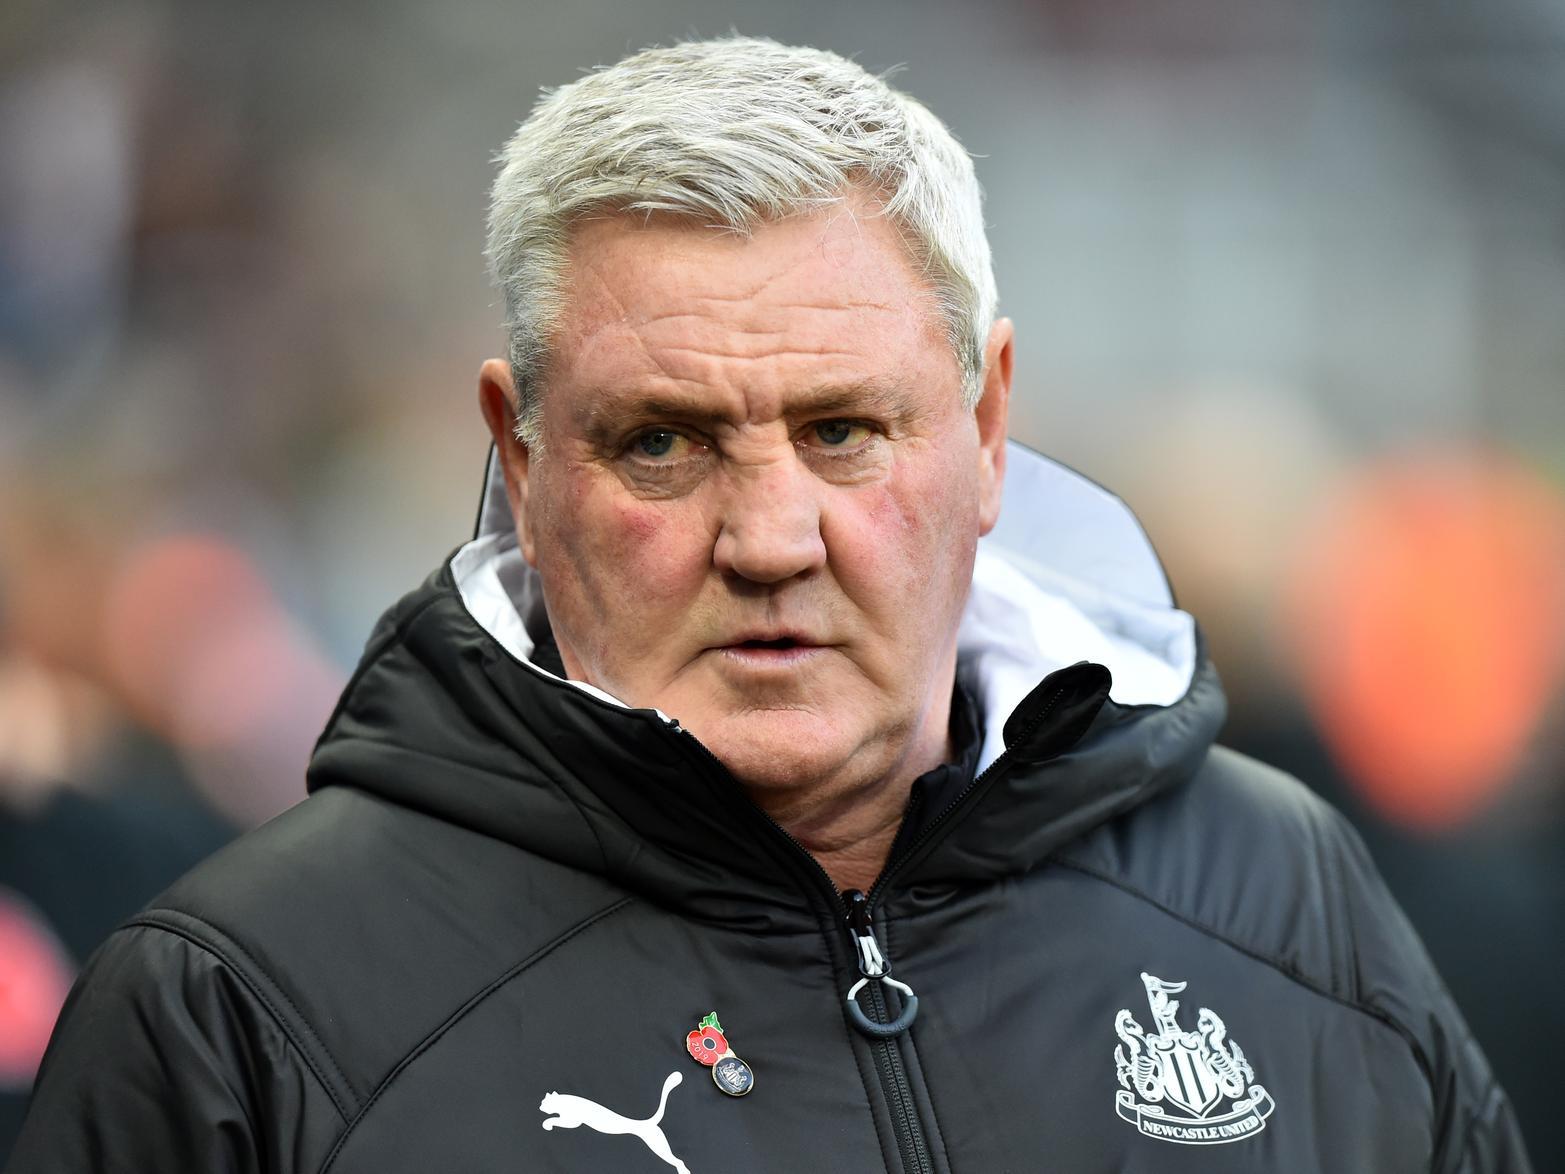 Amid the turbulence at St James's Park, the Newcastle United manager continues to defy the odds. He has been favourite to get the boot on three occasions, but he's doing incredibly well considering the circumstances.